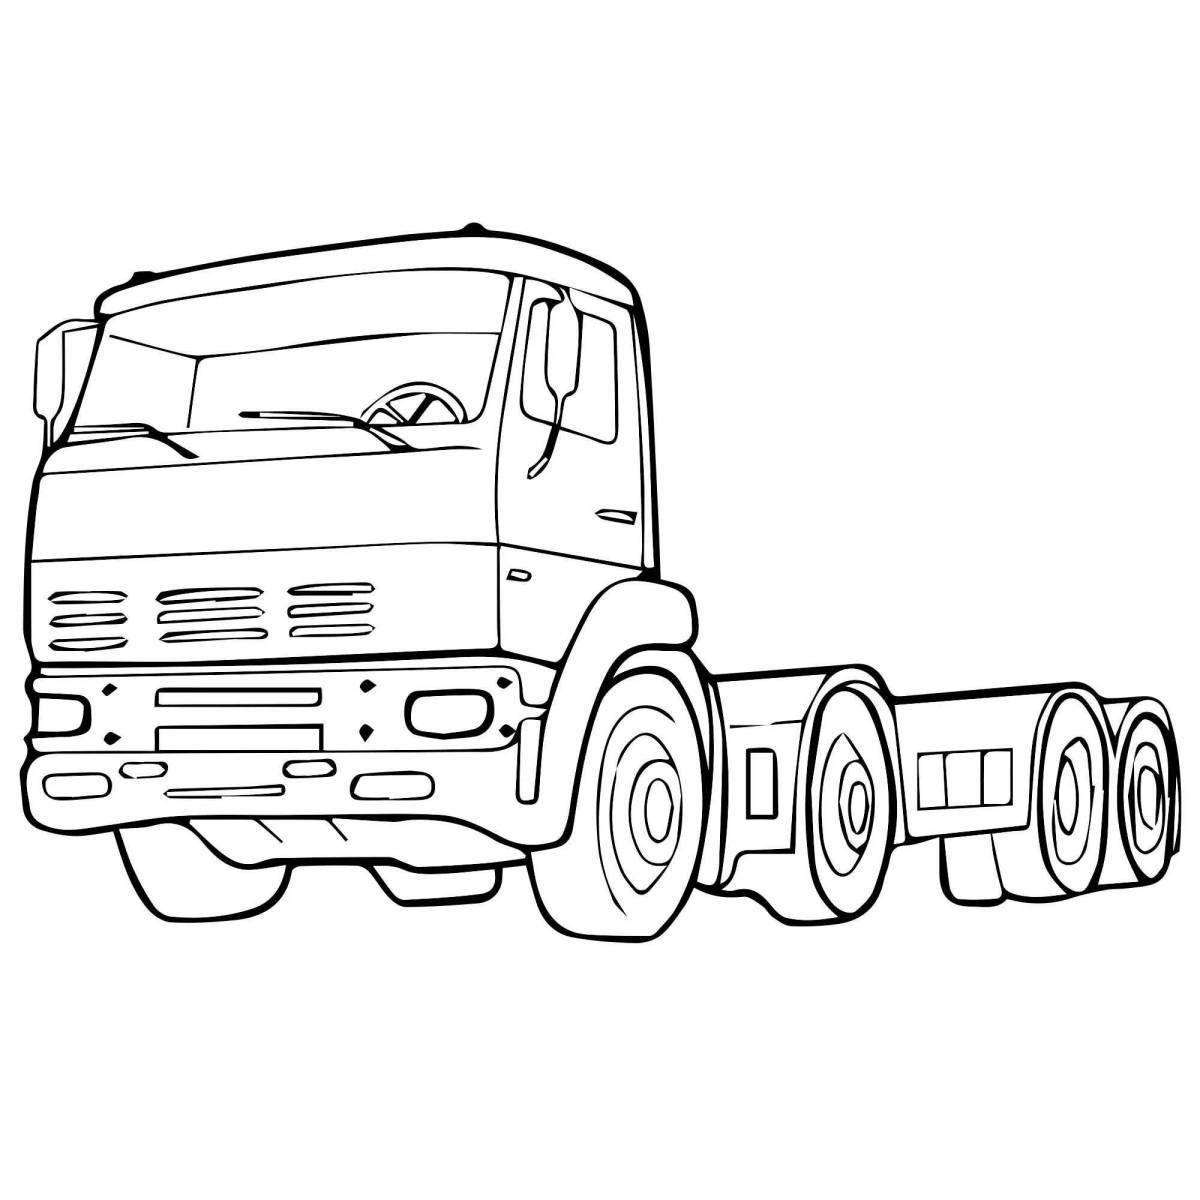 Coloring book gorgeous Kamaz truck